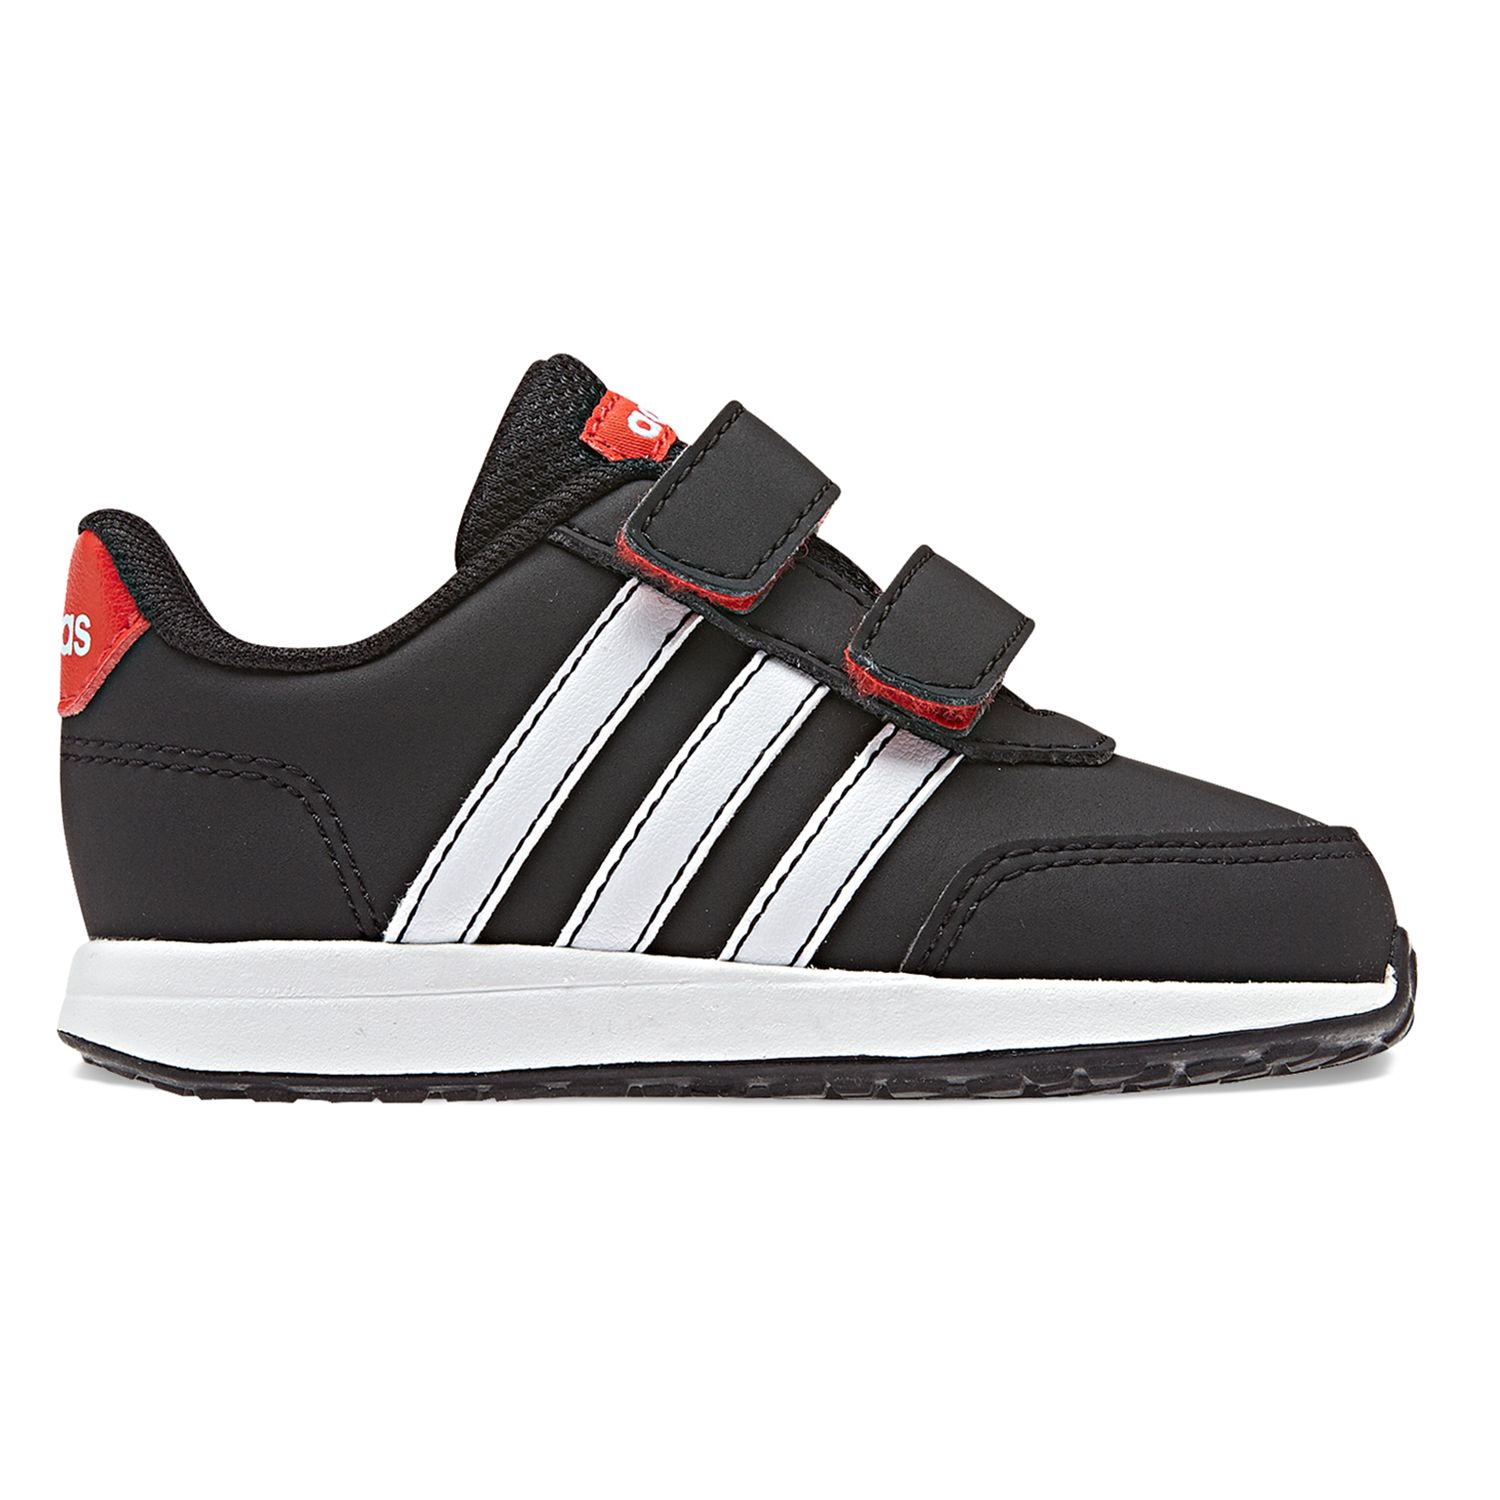 adidas cmf sneakers